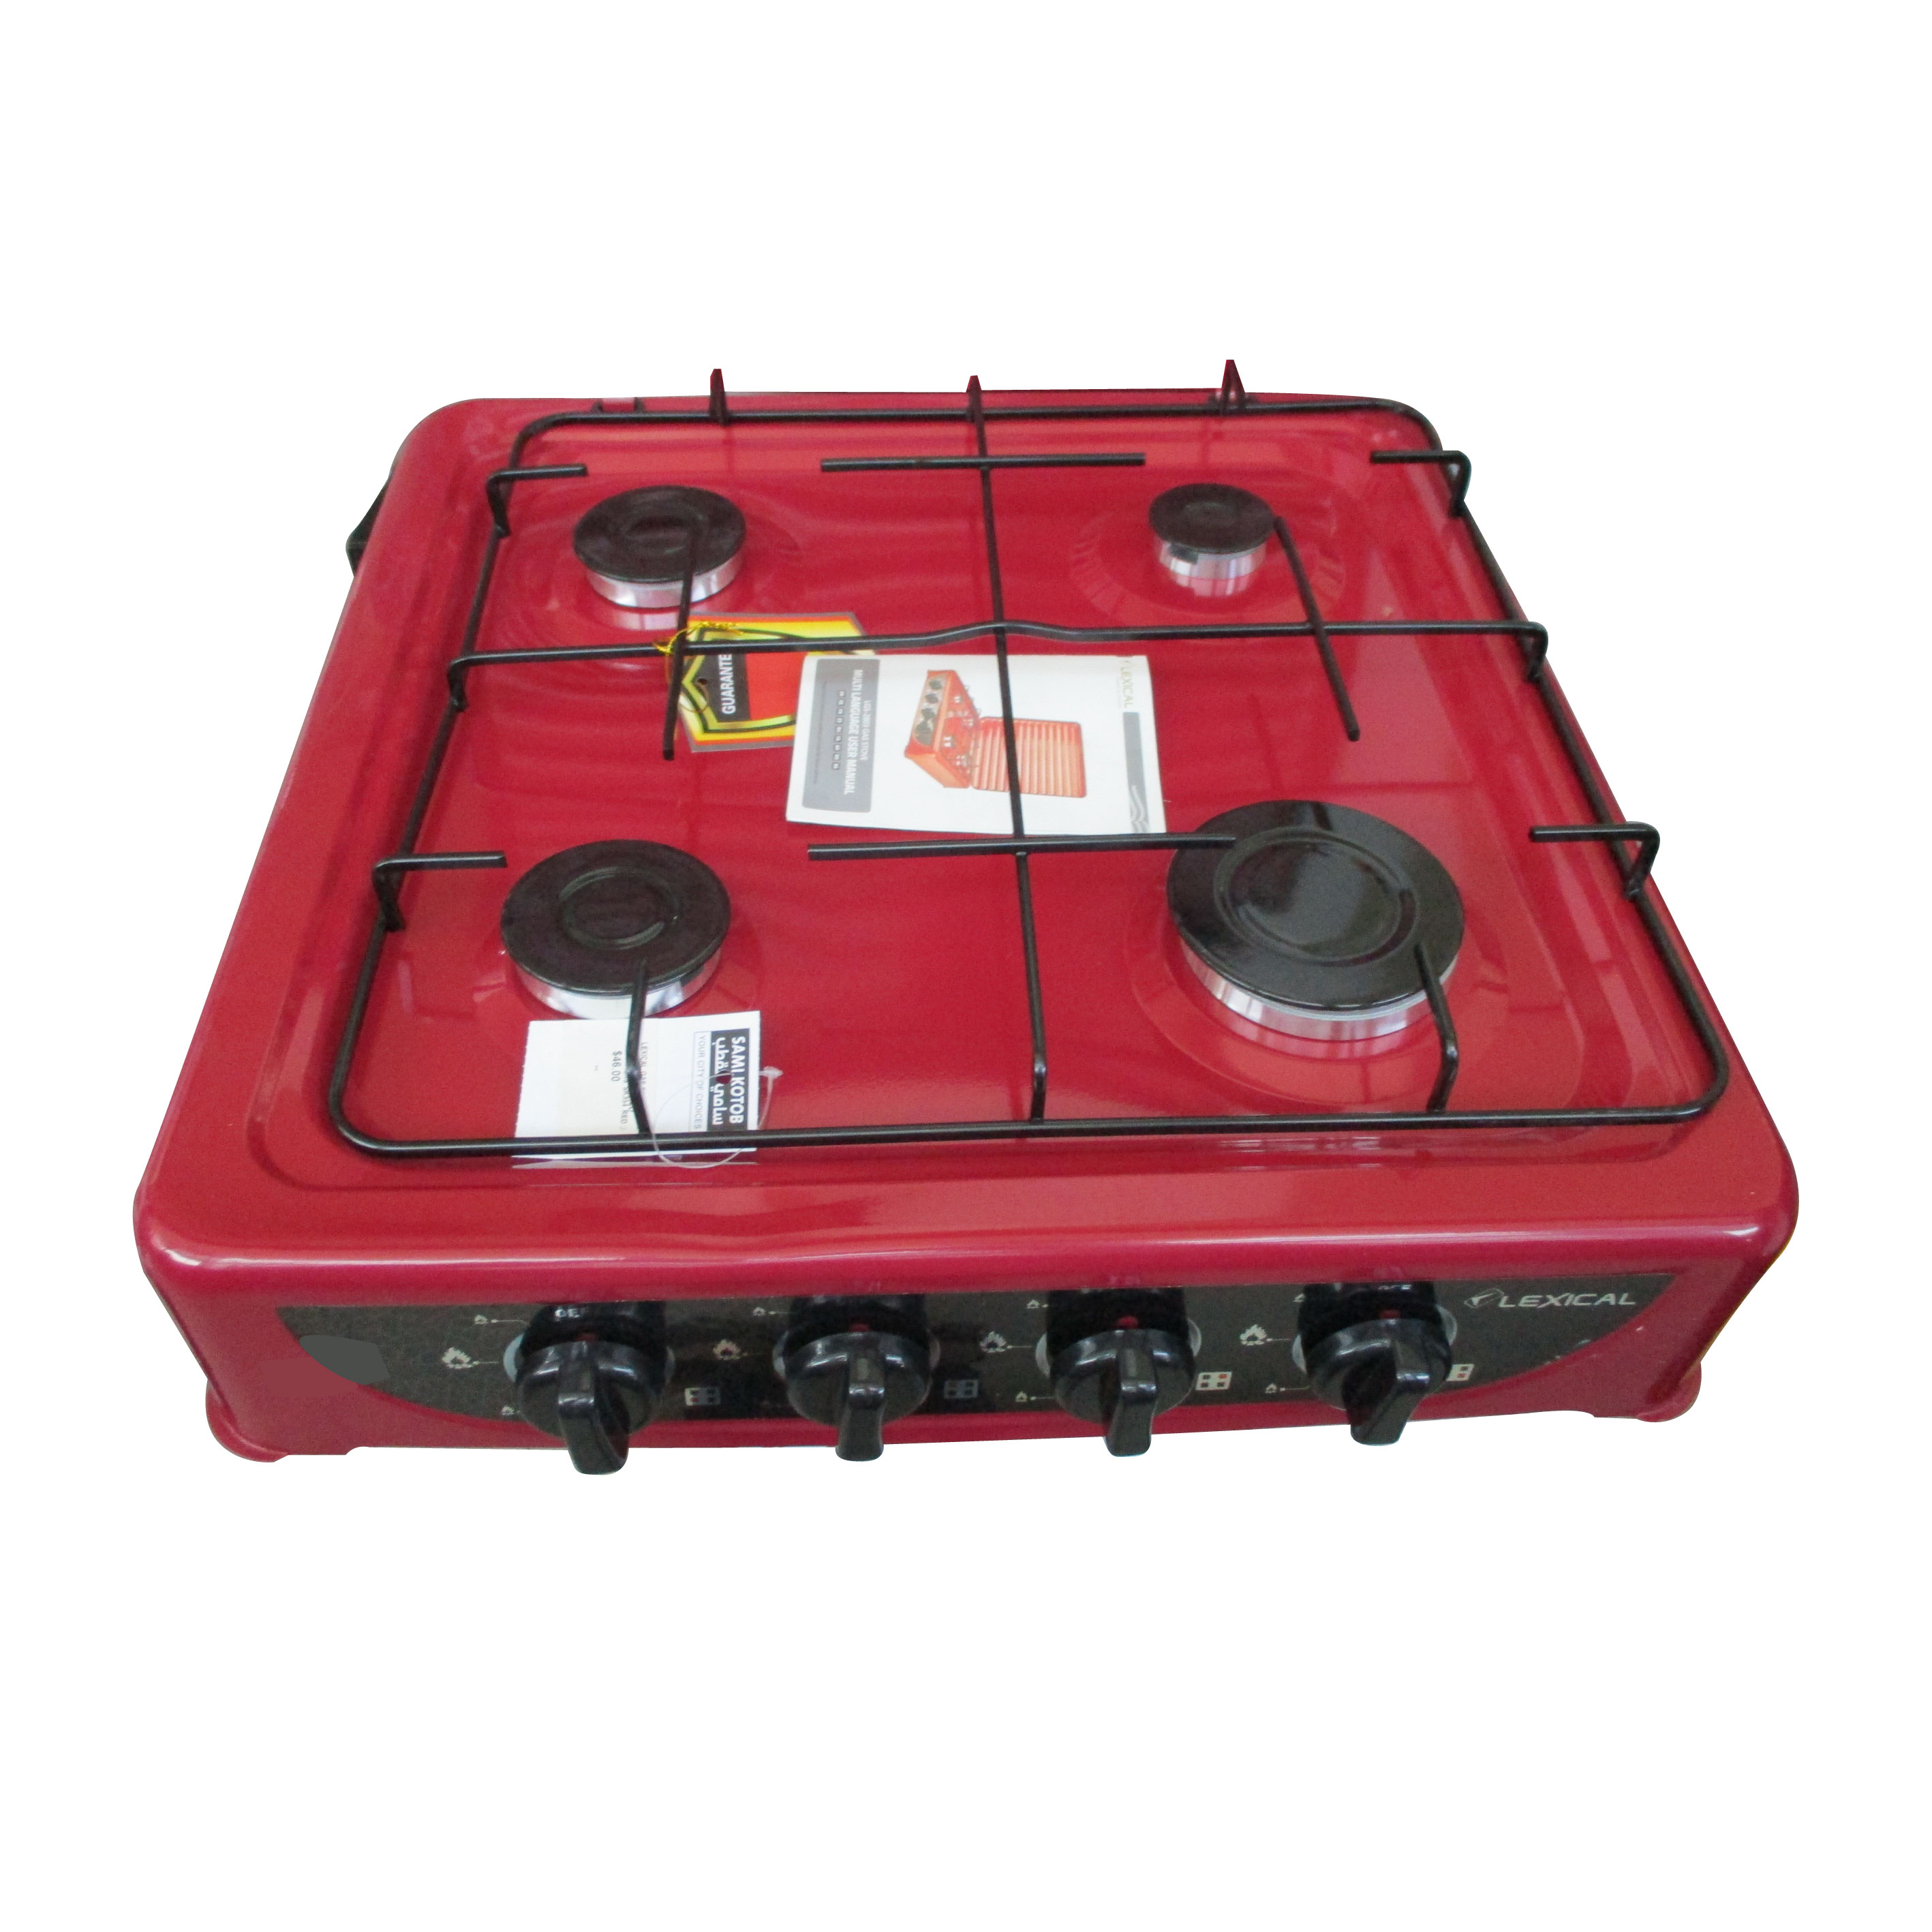 Lexical Gas Stove Table Top 4 Burners Red, SK354R